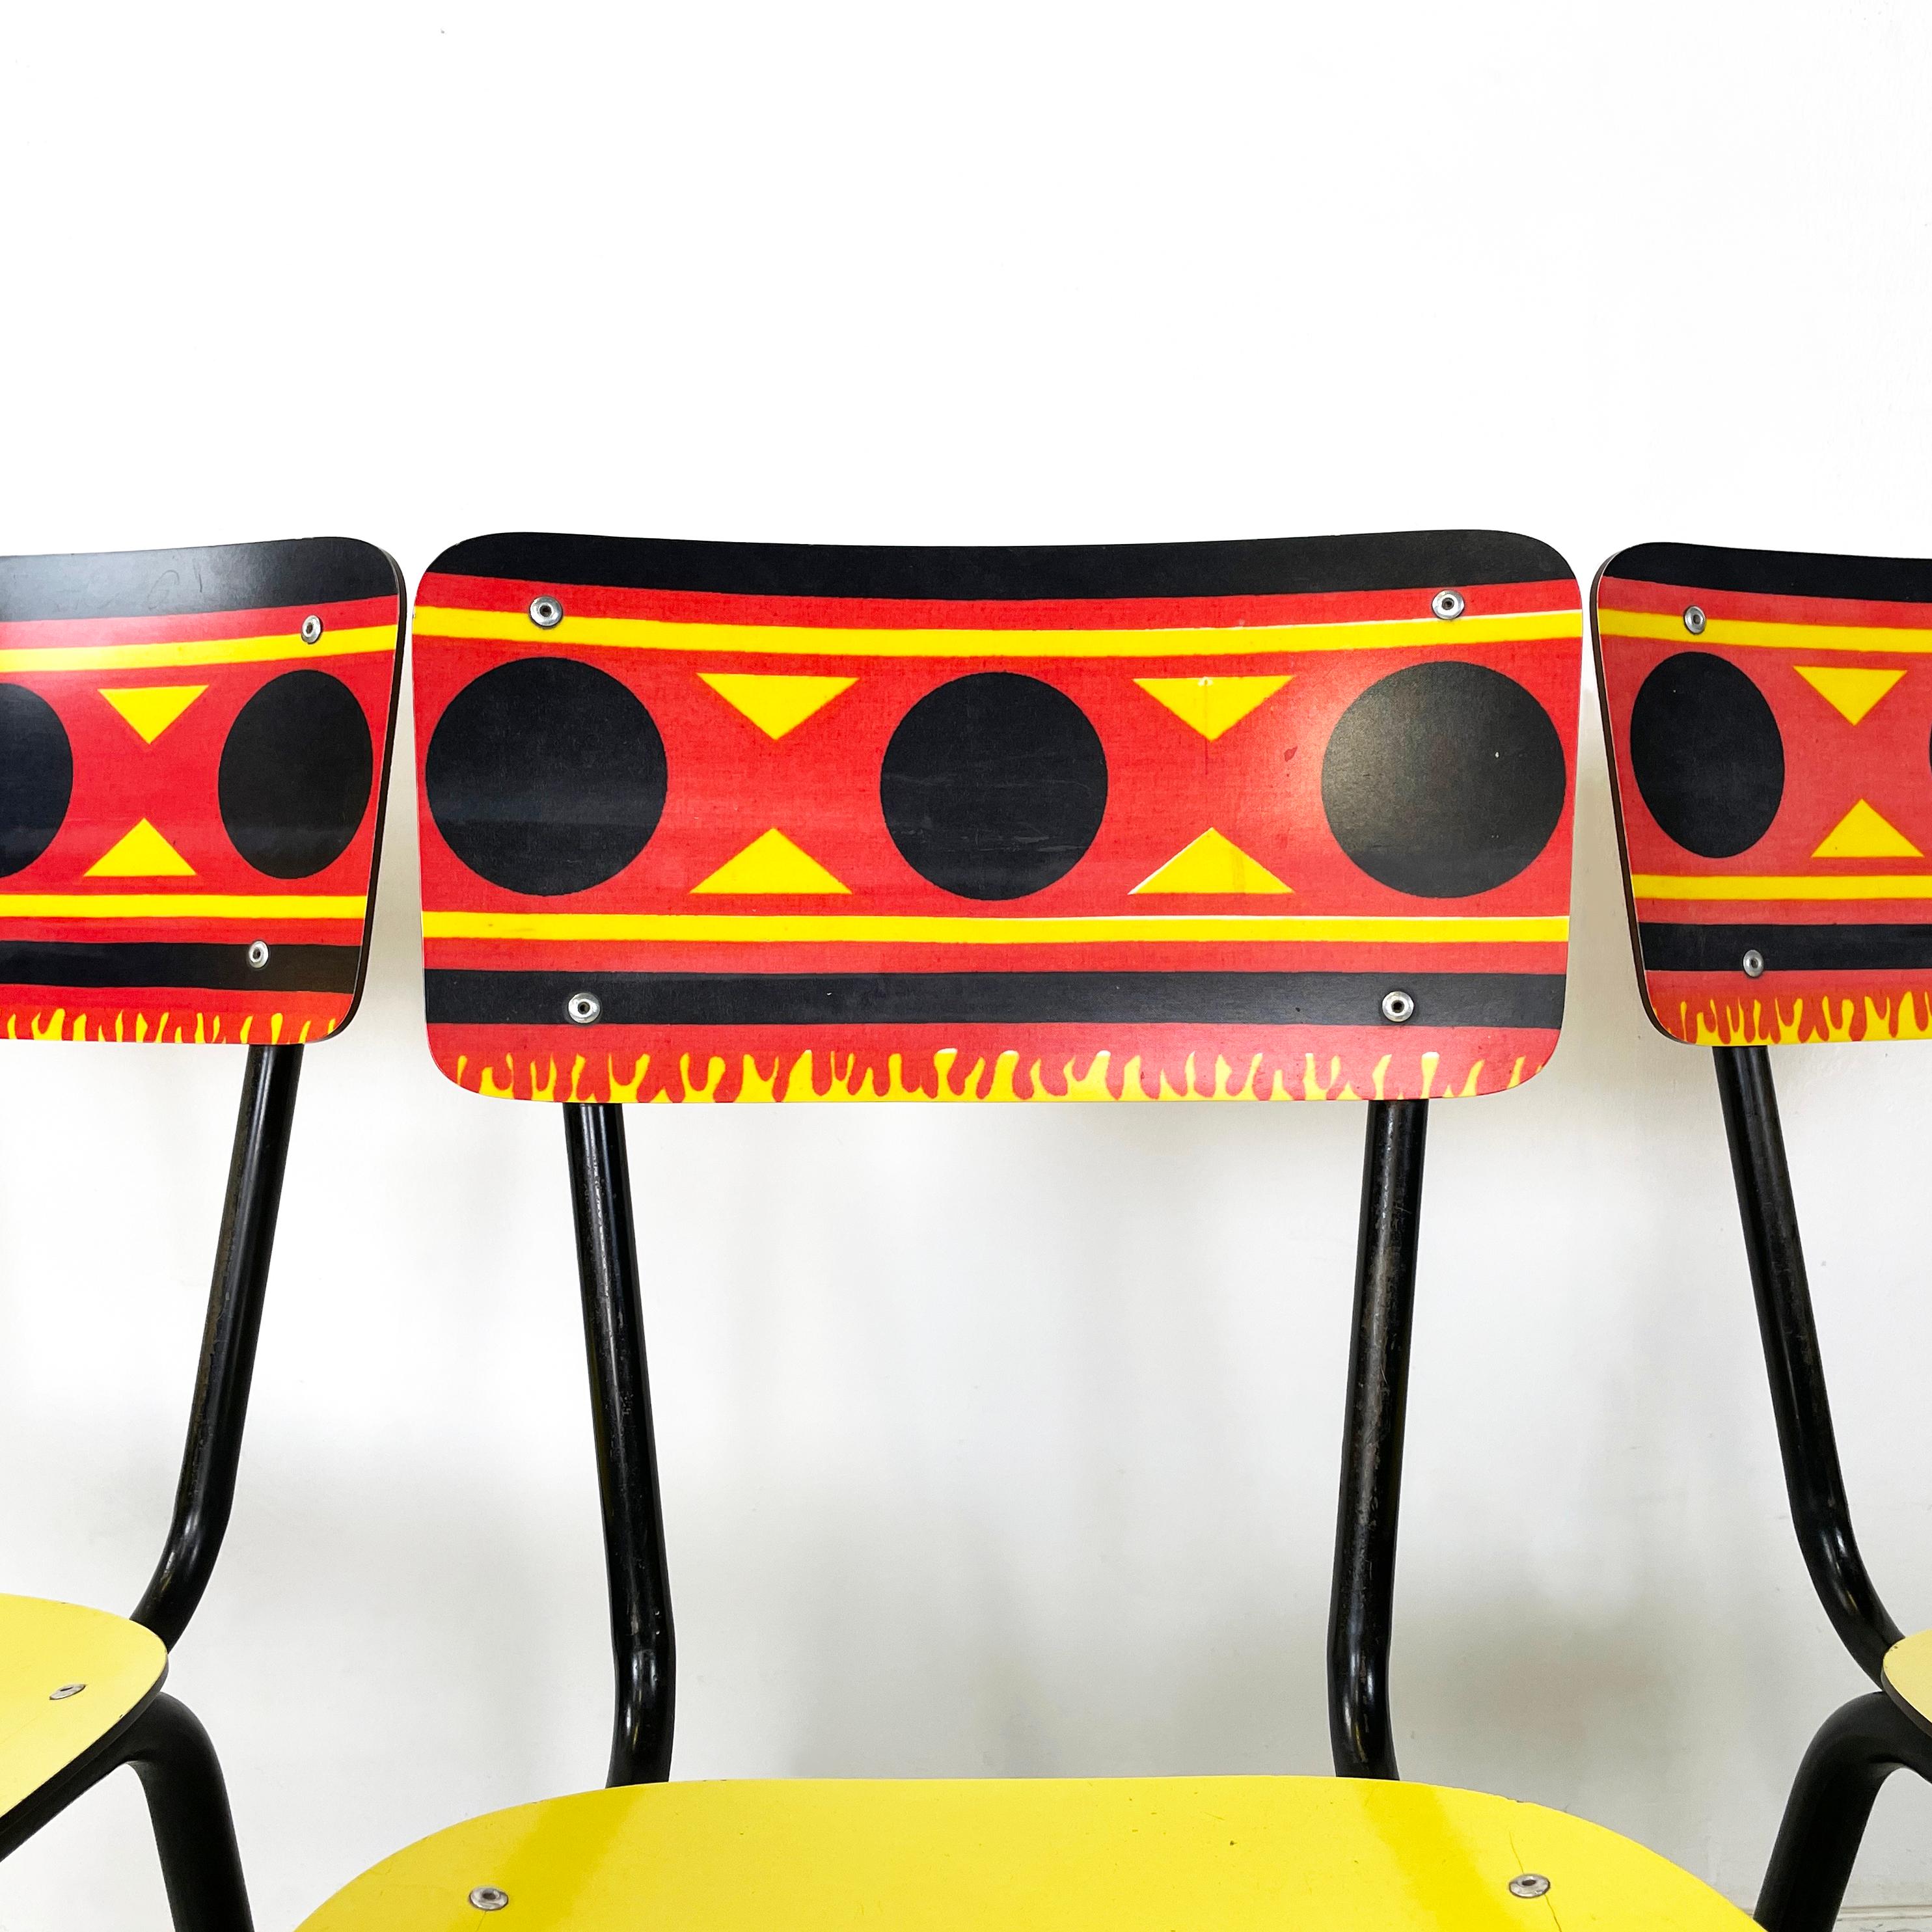 Italian mid-century Chairs Paulista in yellow, red, black formica metal, 1960s For Sale 1